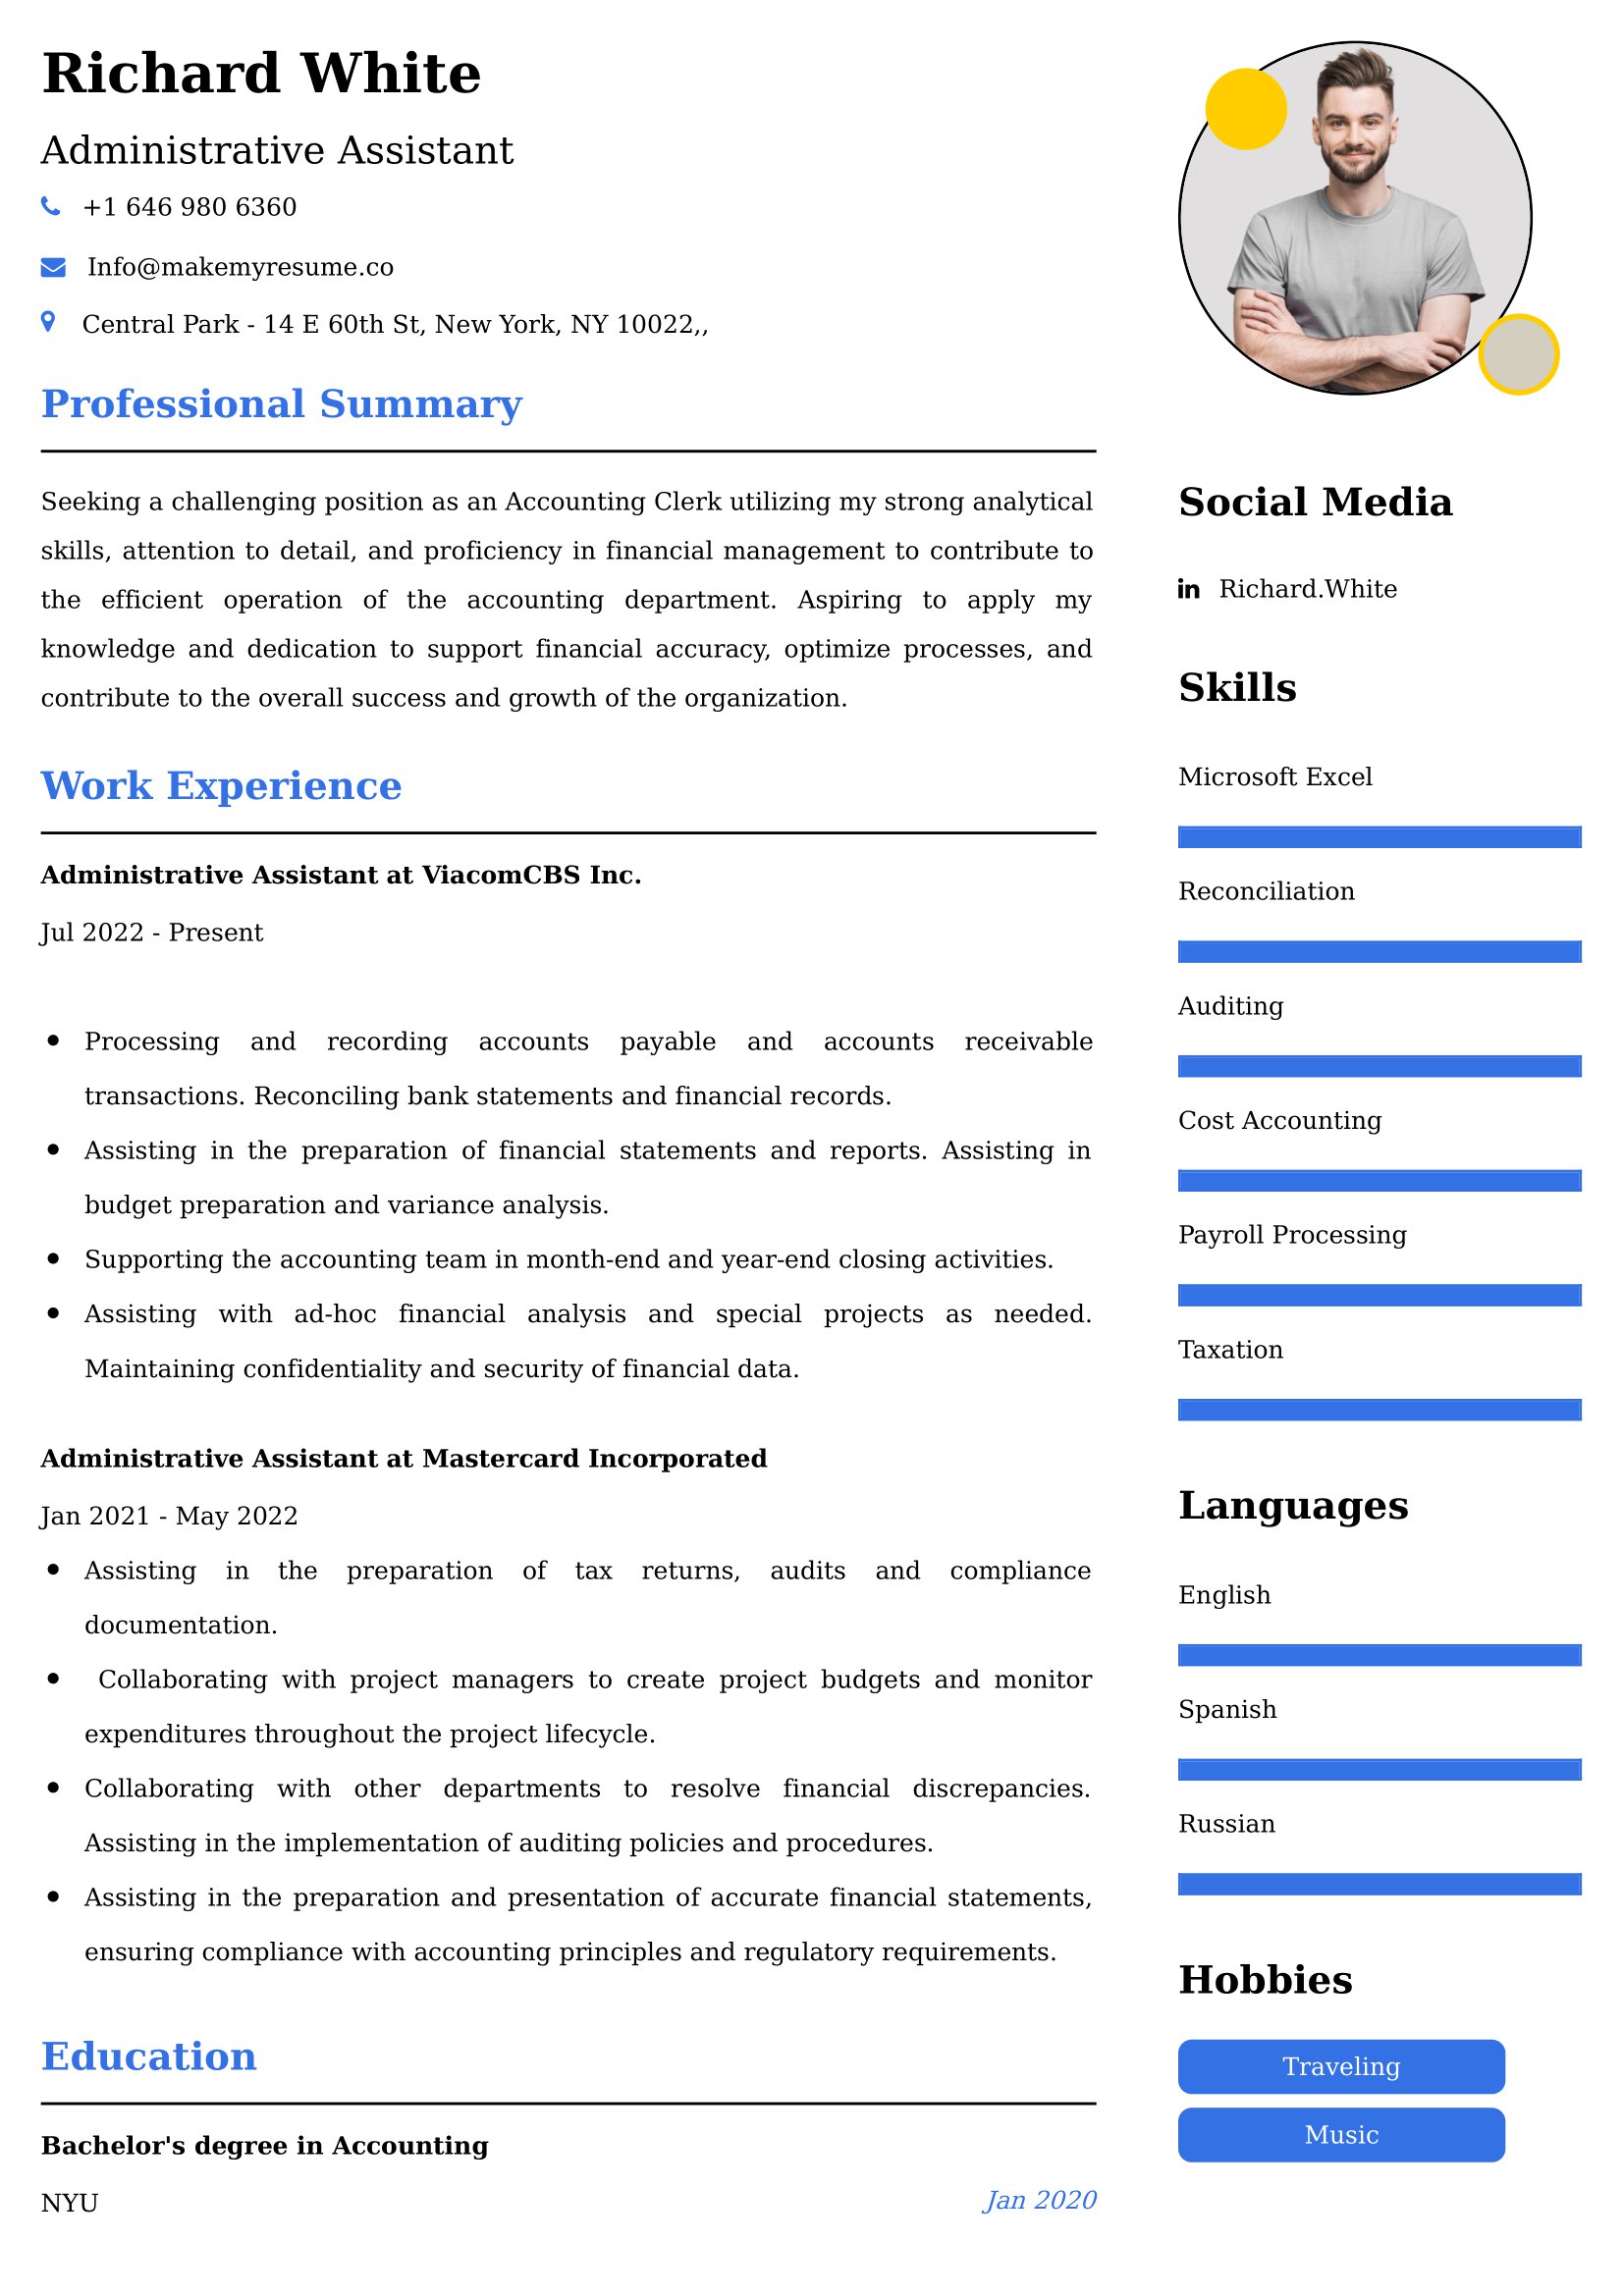 Administrative Assistant Resume Examples - UK Format, Latest Template.